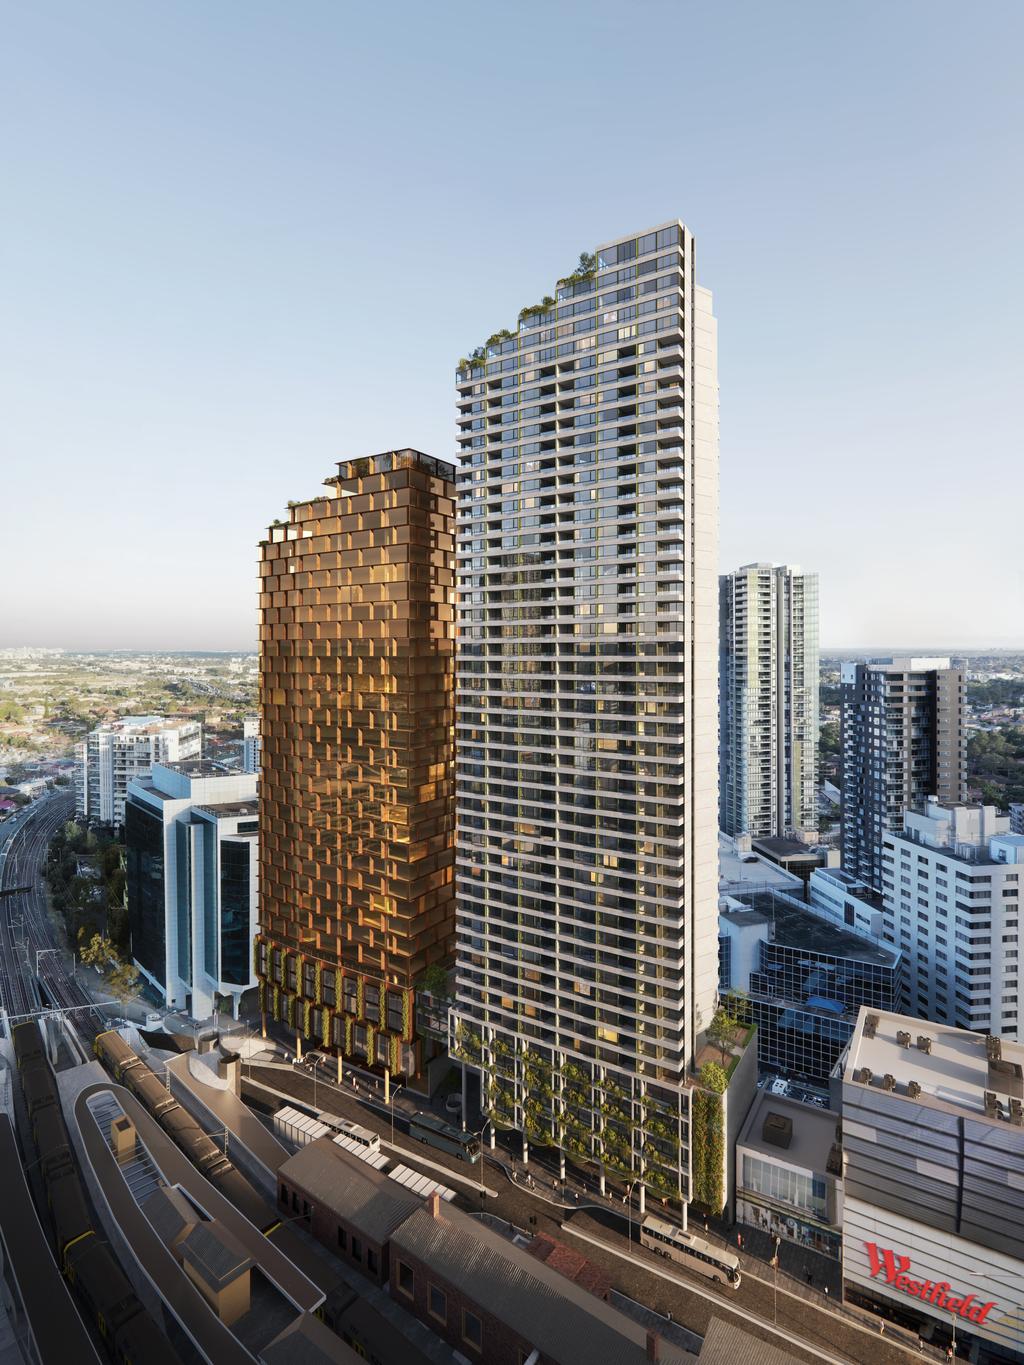 Artists impression of $600m development project in Western Sydney